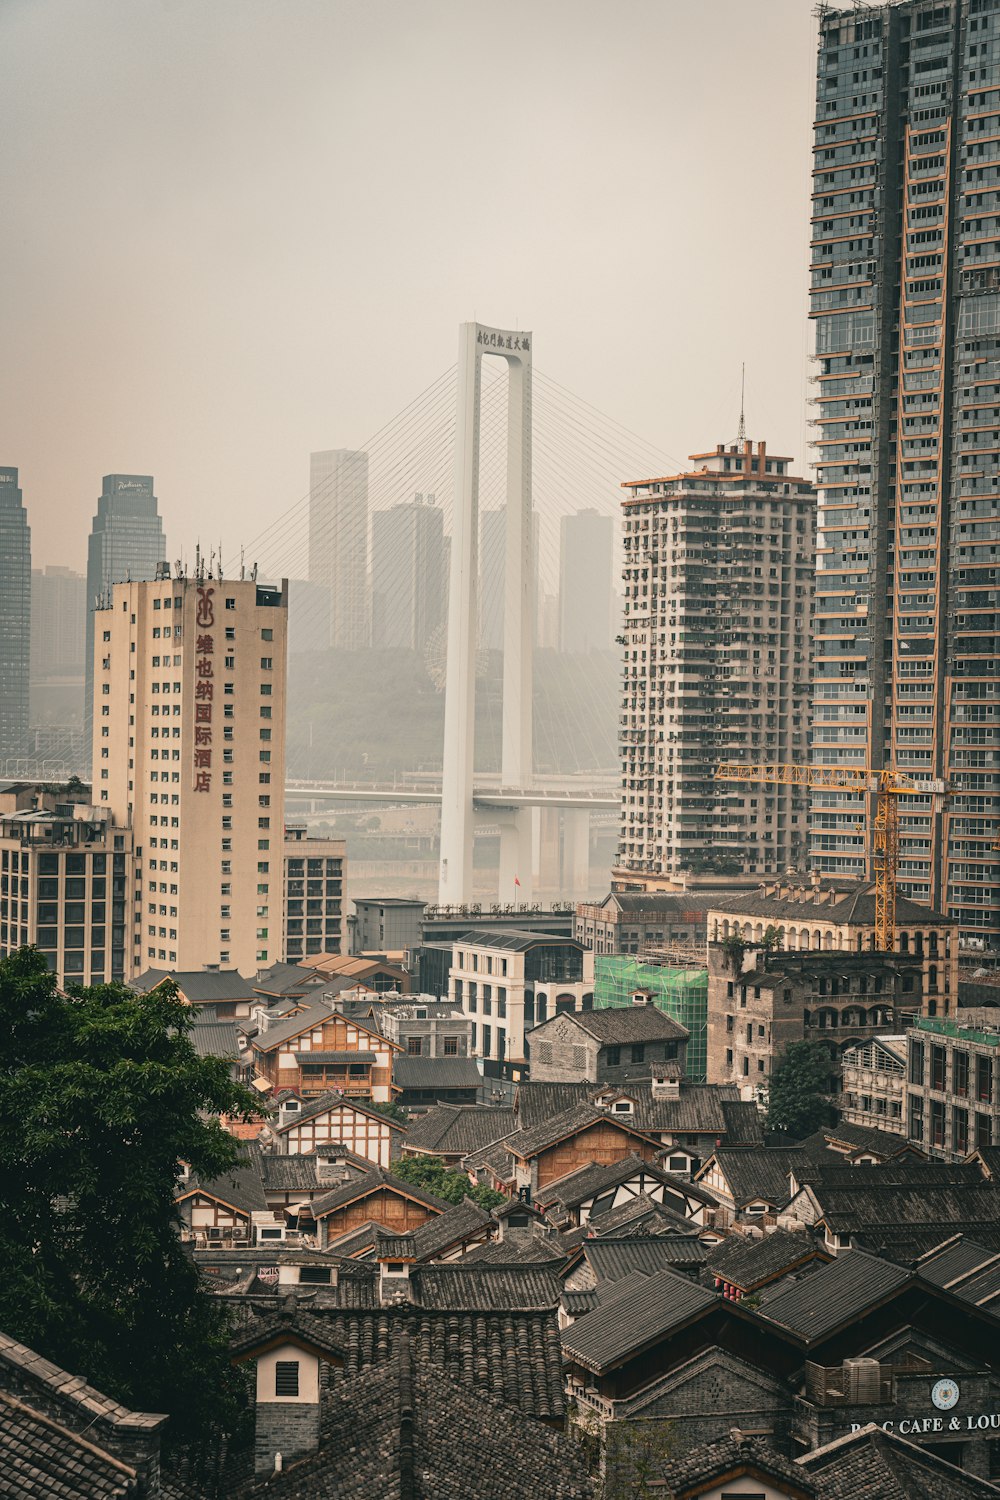 a view of a city with a bridge in the background